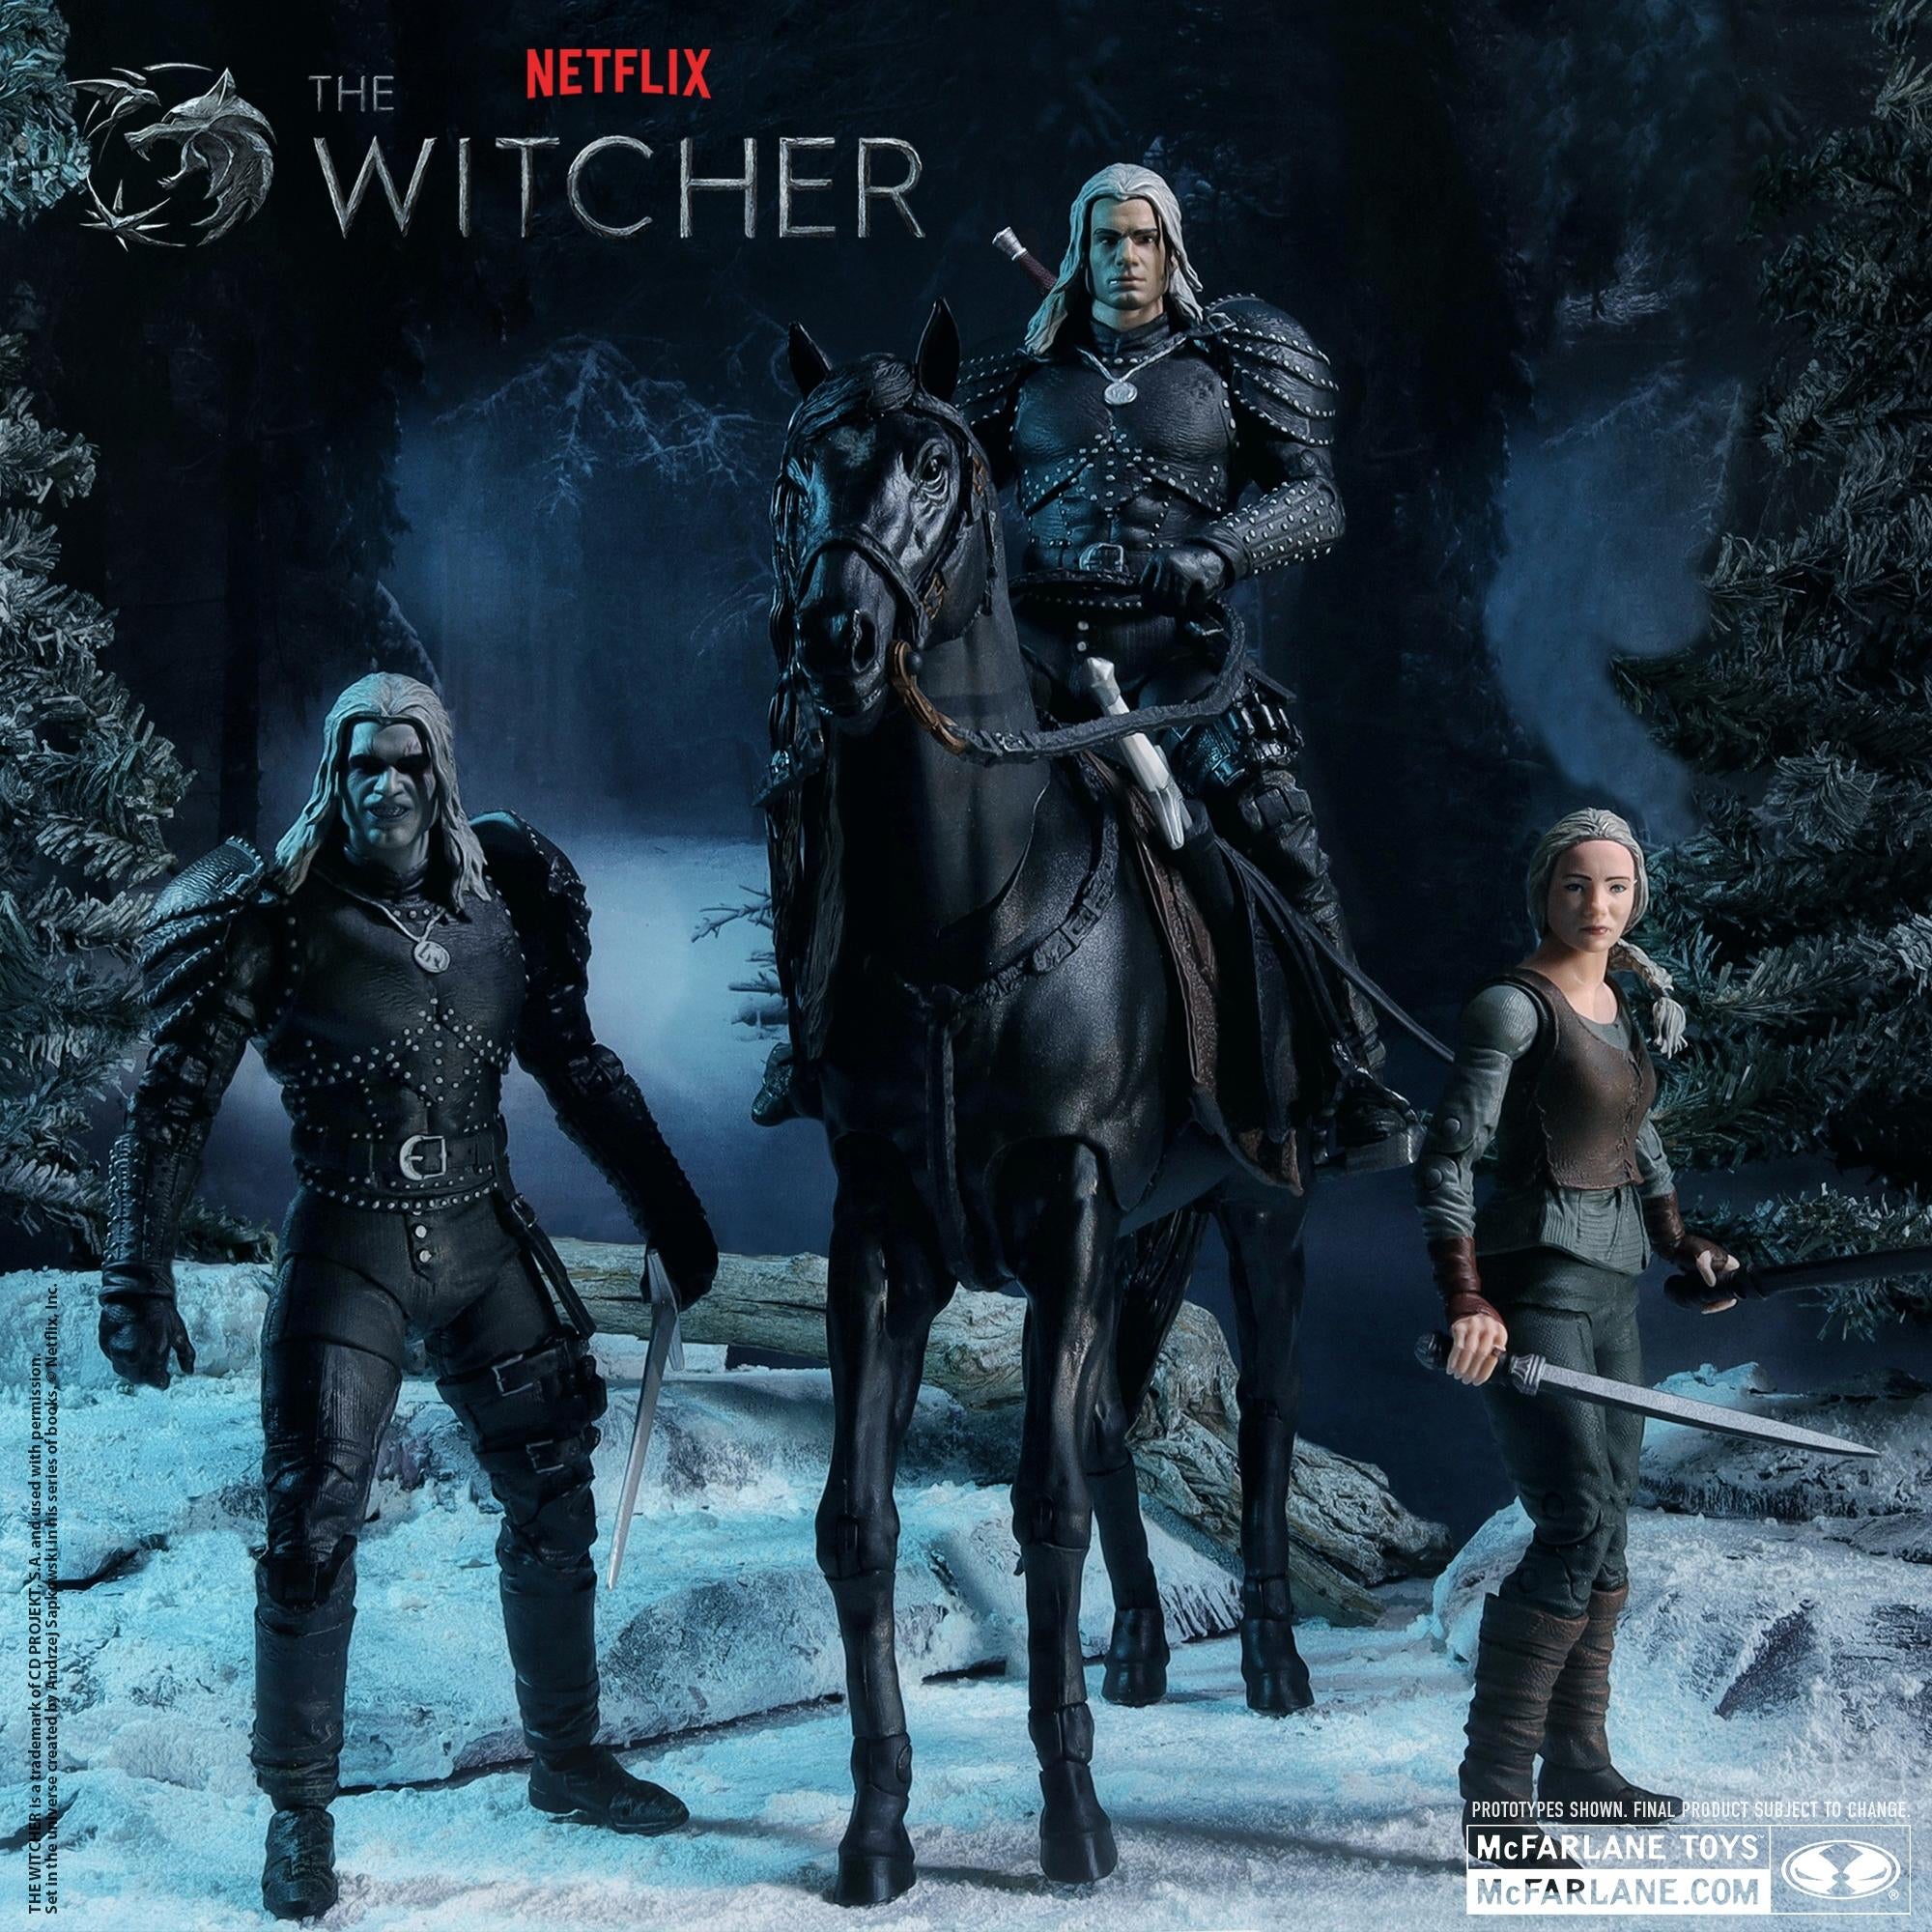 Witcher 2 the season ‘The Witcher’: